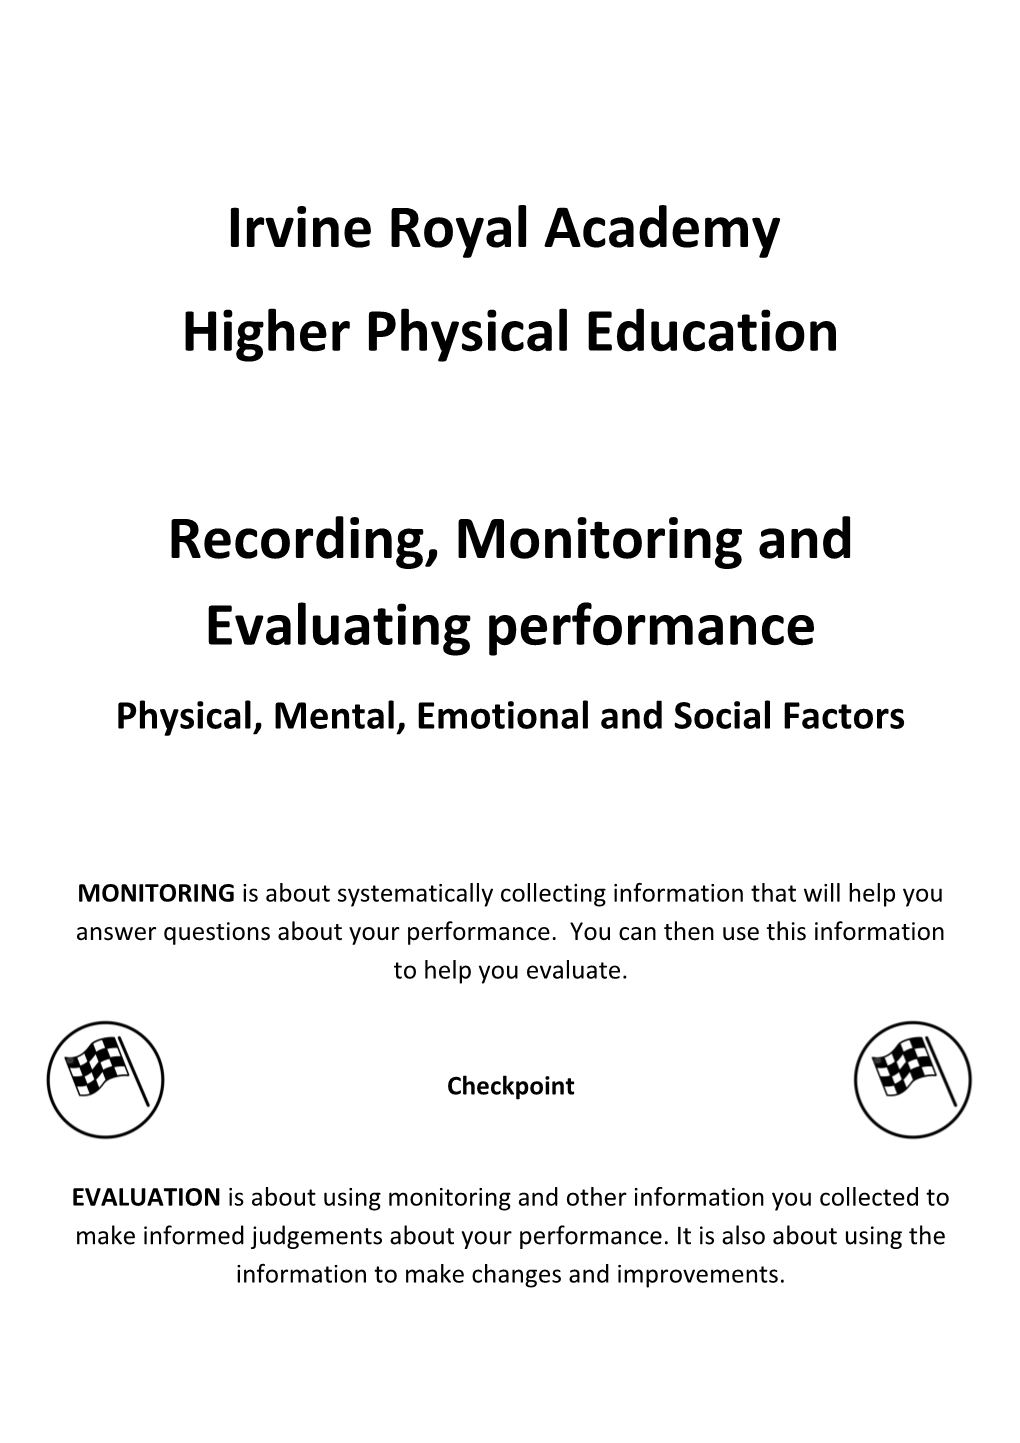 Recording, Monitoring and Evaluating Performance